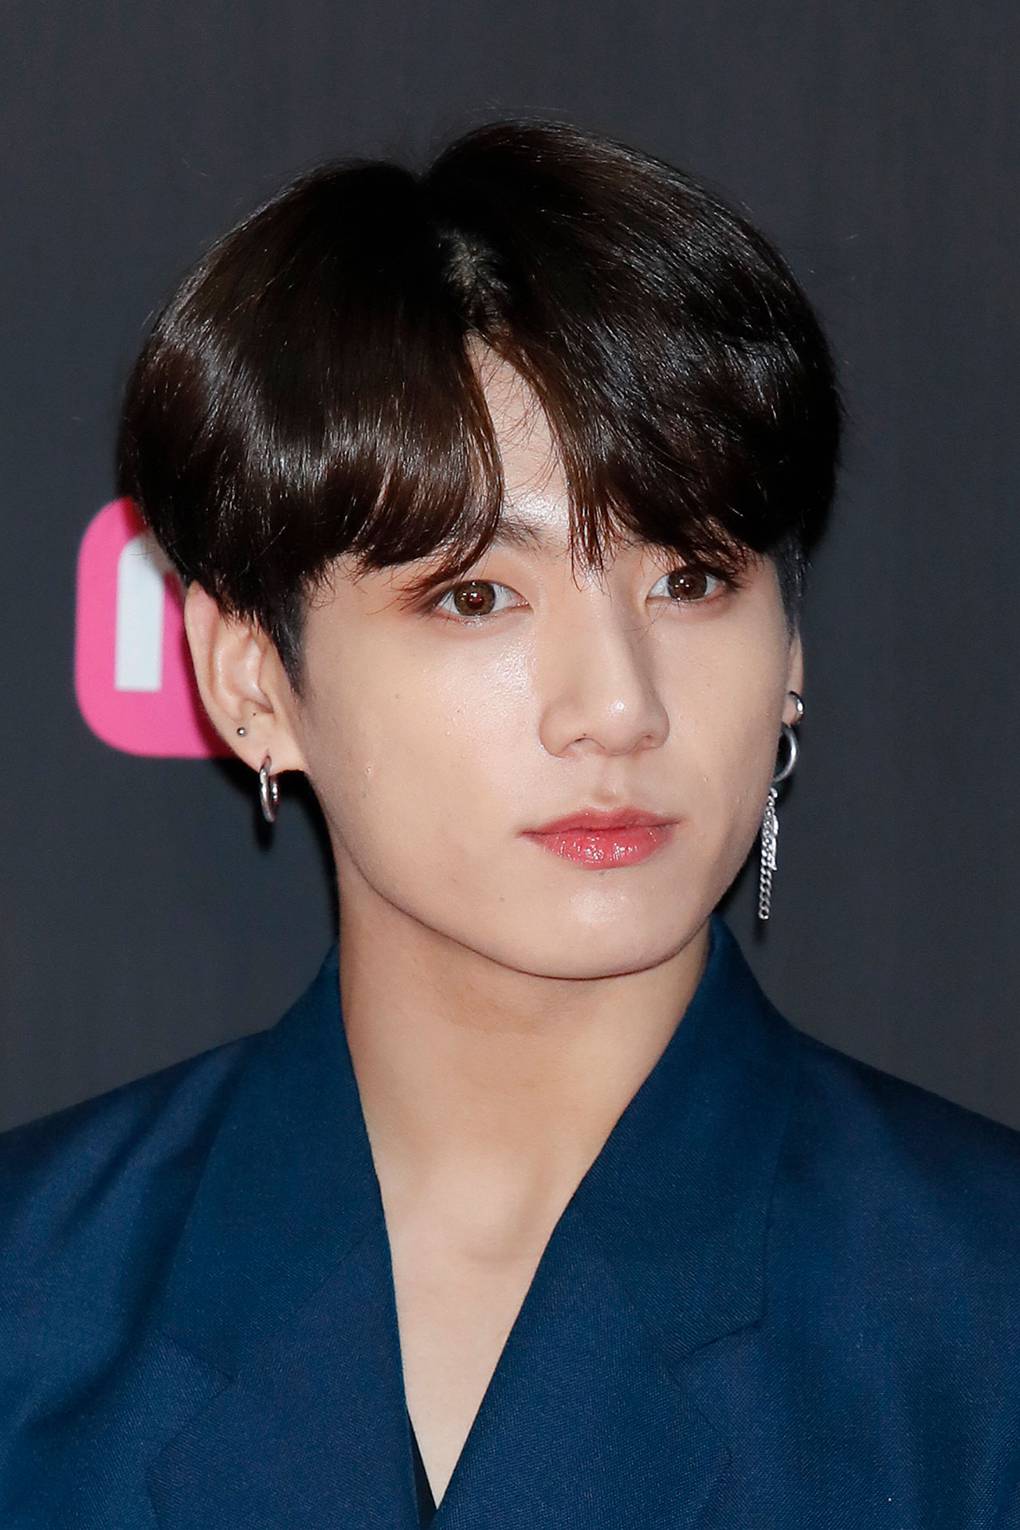 Jungkook Age 18 Famous Person